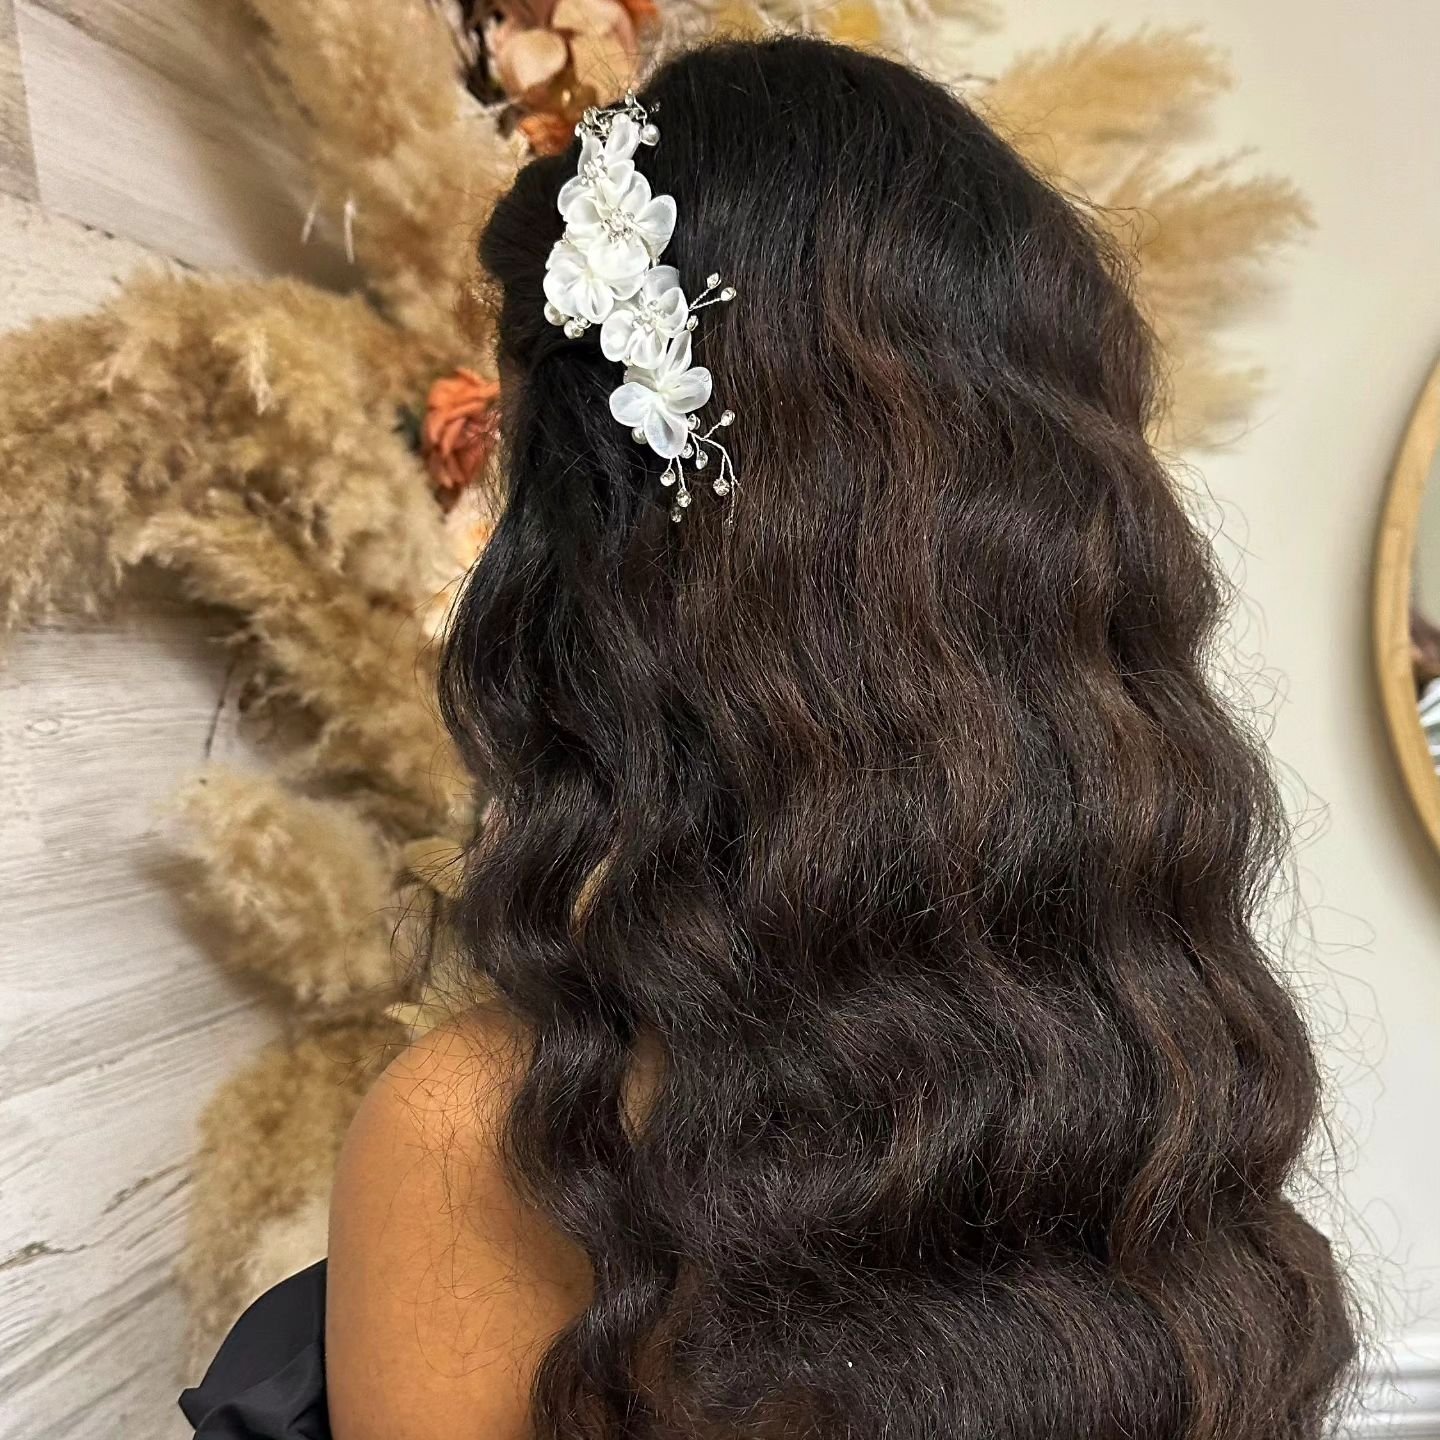 Wanting to try Hollywood Waves for your big day? Schedule a trial with our talented hairstylists that can make this style come to fruition and even personalized! 

#idoglamcrew 

#marylandhairstylist #marylandbridalhairstylist #marylandbridalhair #dm